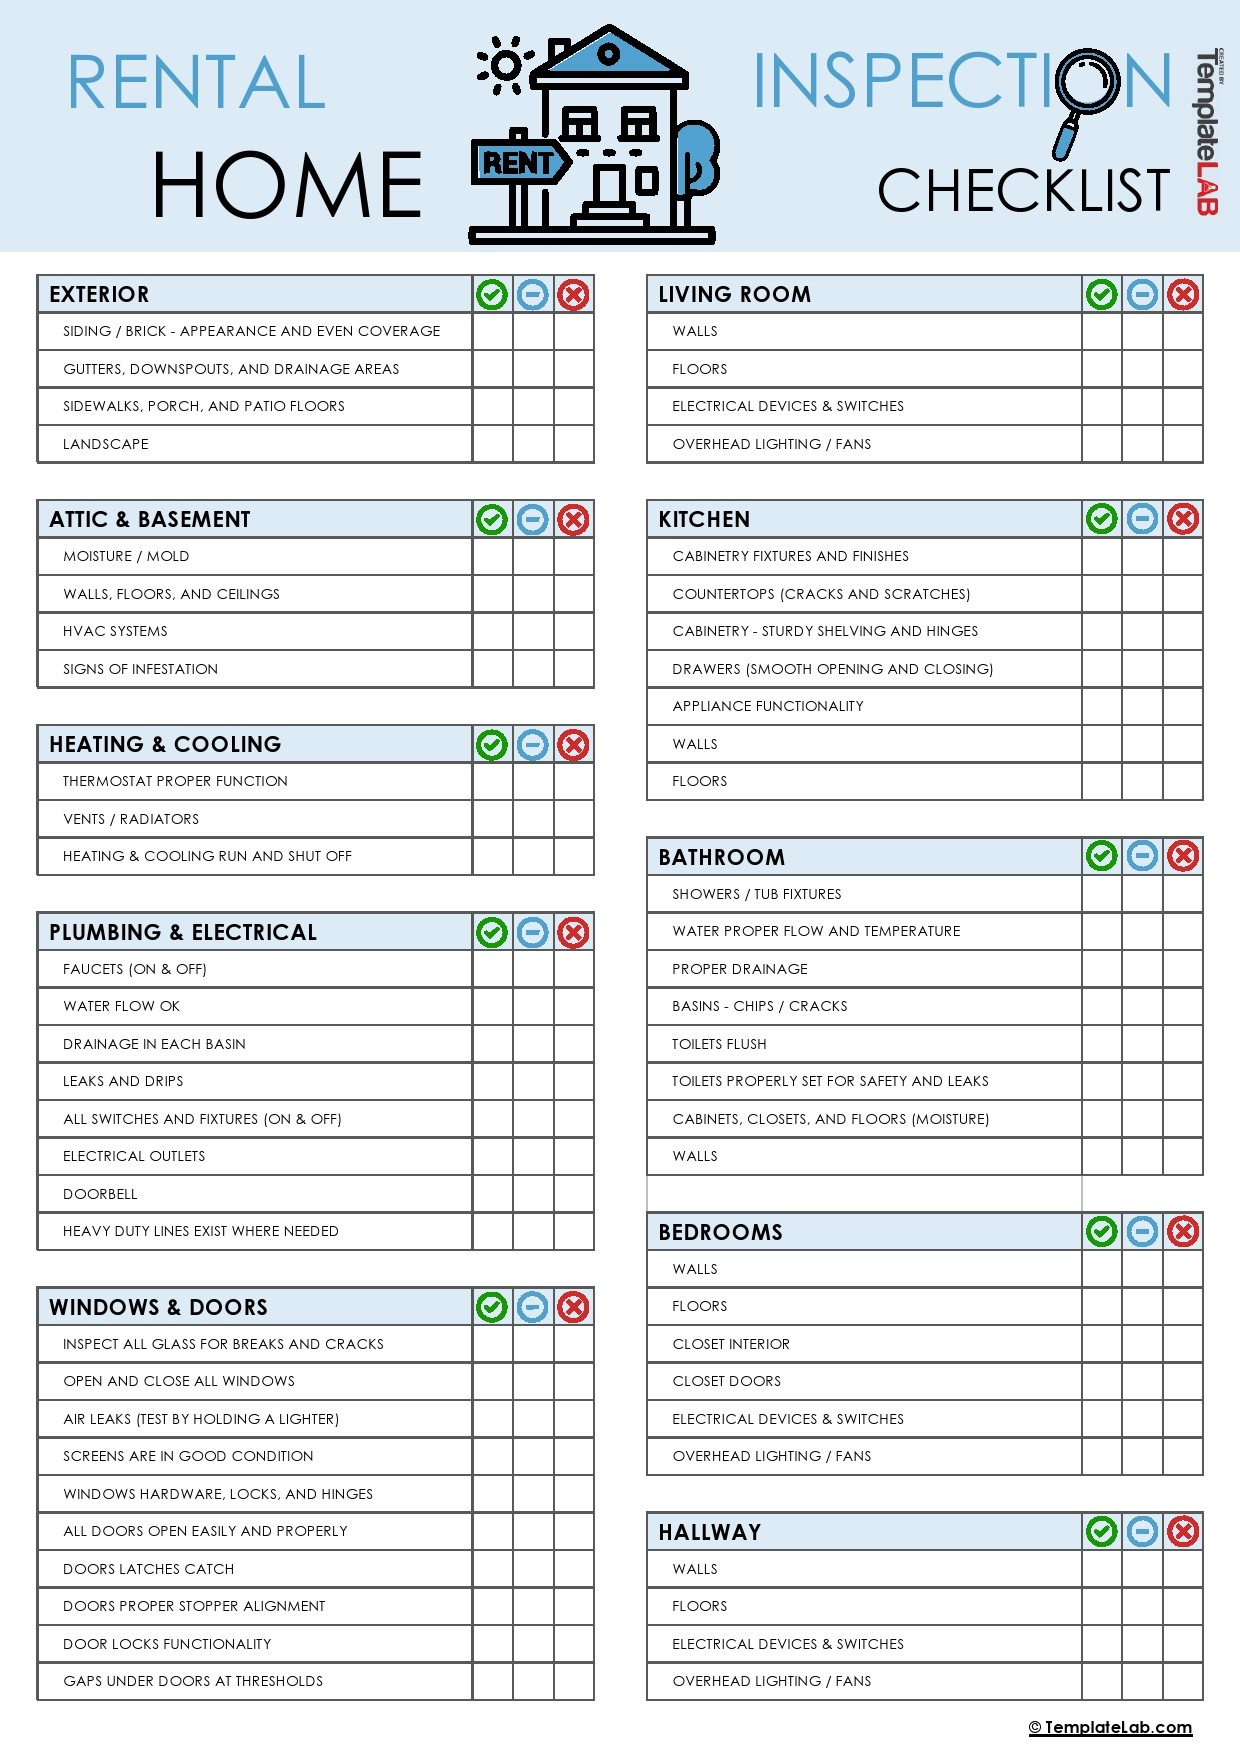 10+ Printable Home Inspection Checklists (Word, PDF) ᐅ TemplateLab In Home Construction Checklist Template With Regard To Home Construction Checklist Template